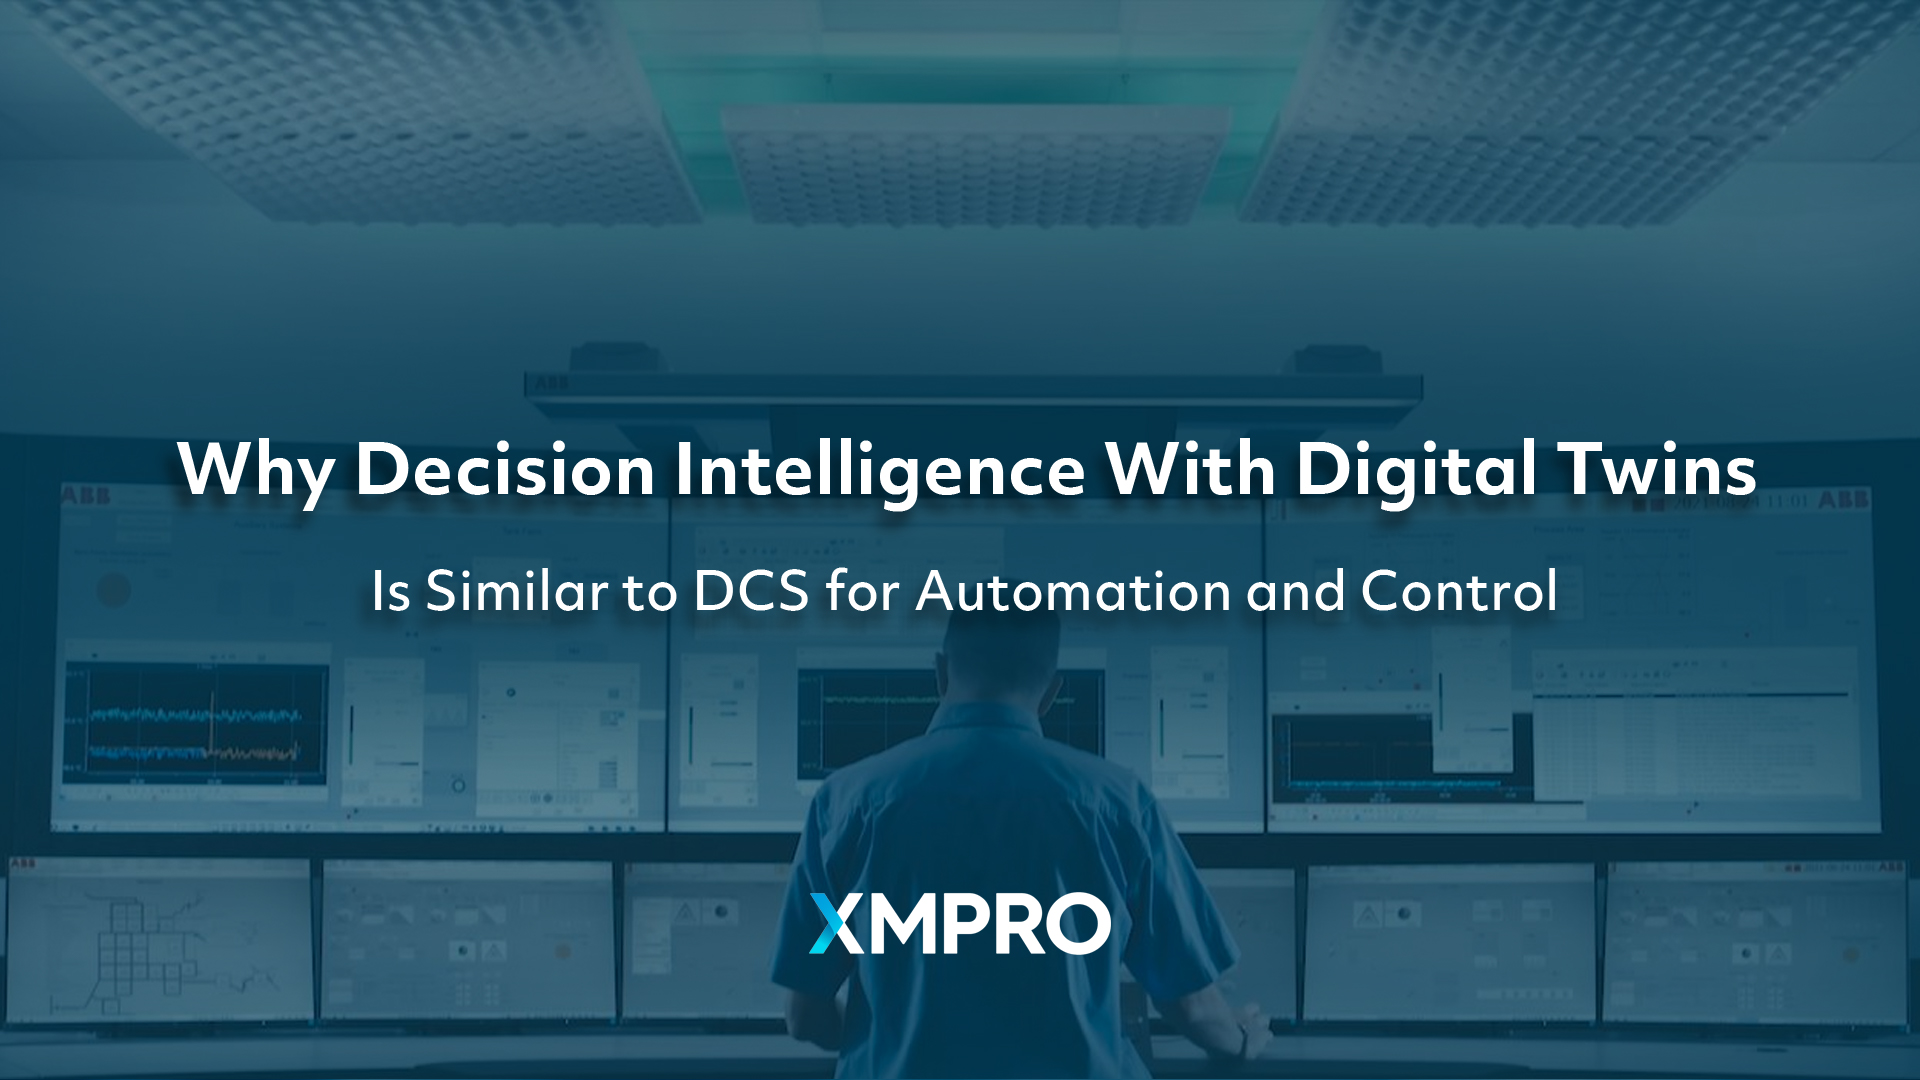 Why Decision Intelligence with Digital Twins is “kinda like” DCS for  Automation and Control - XMPRO